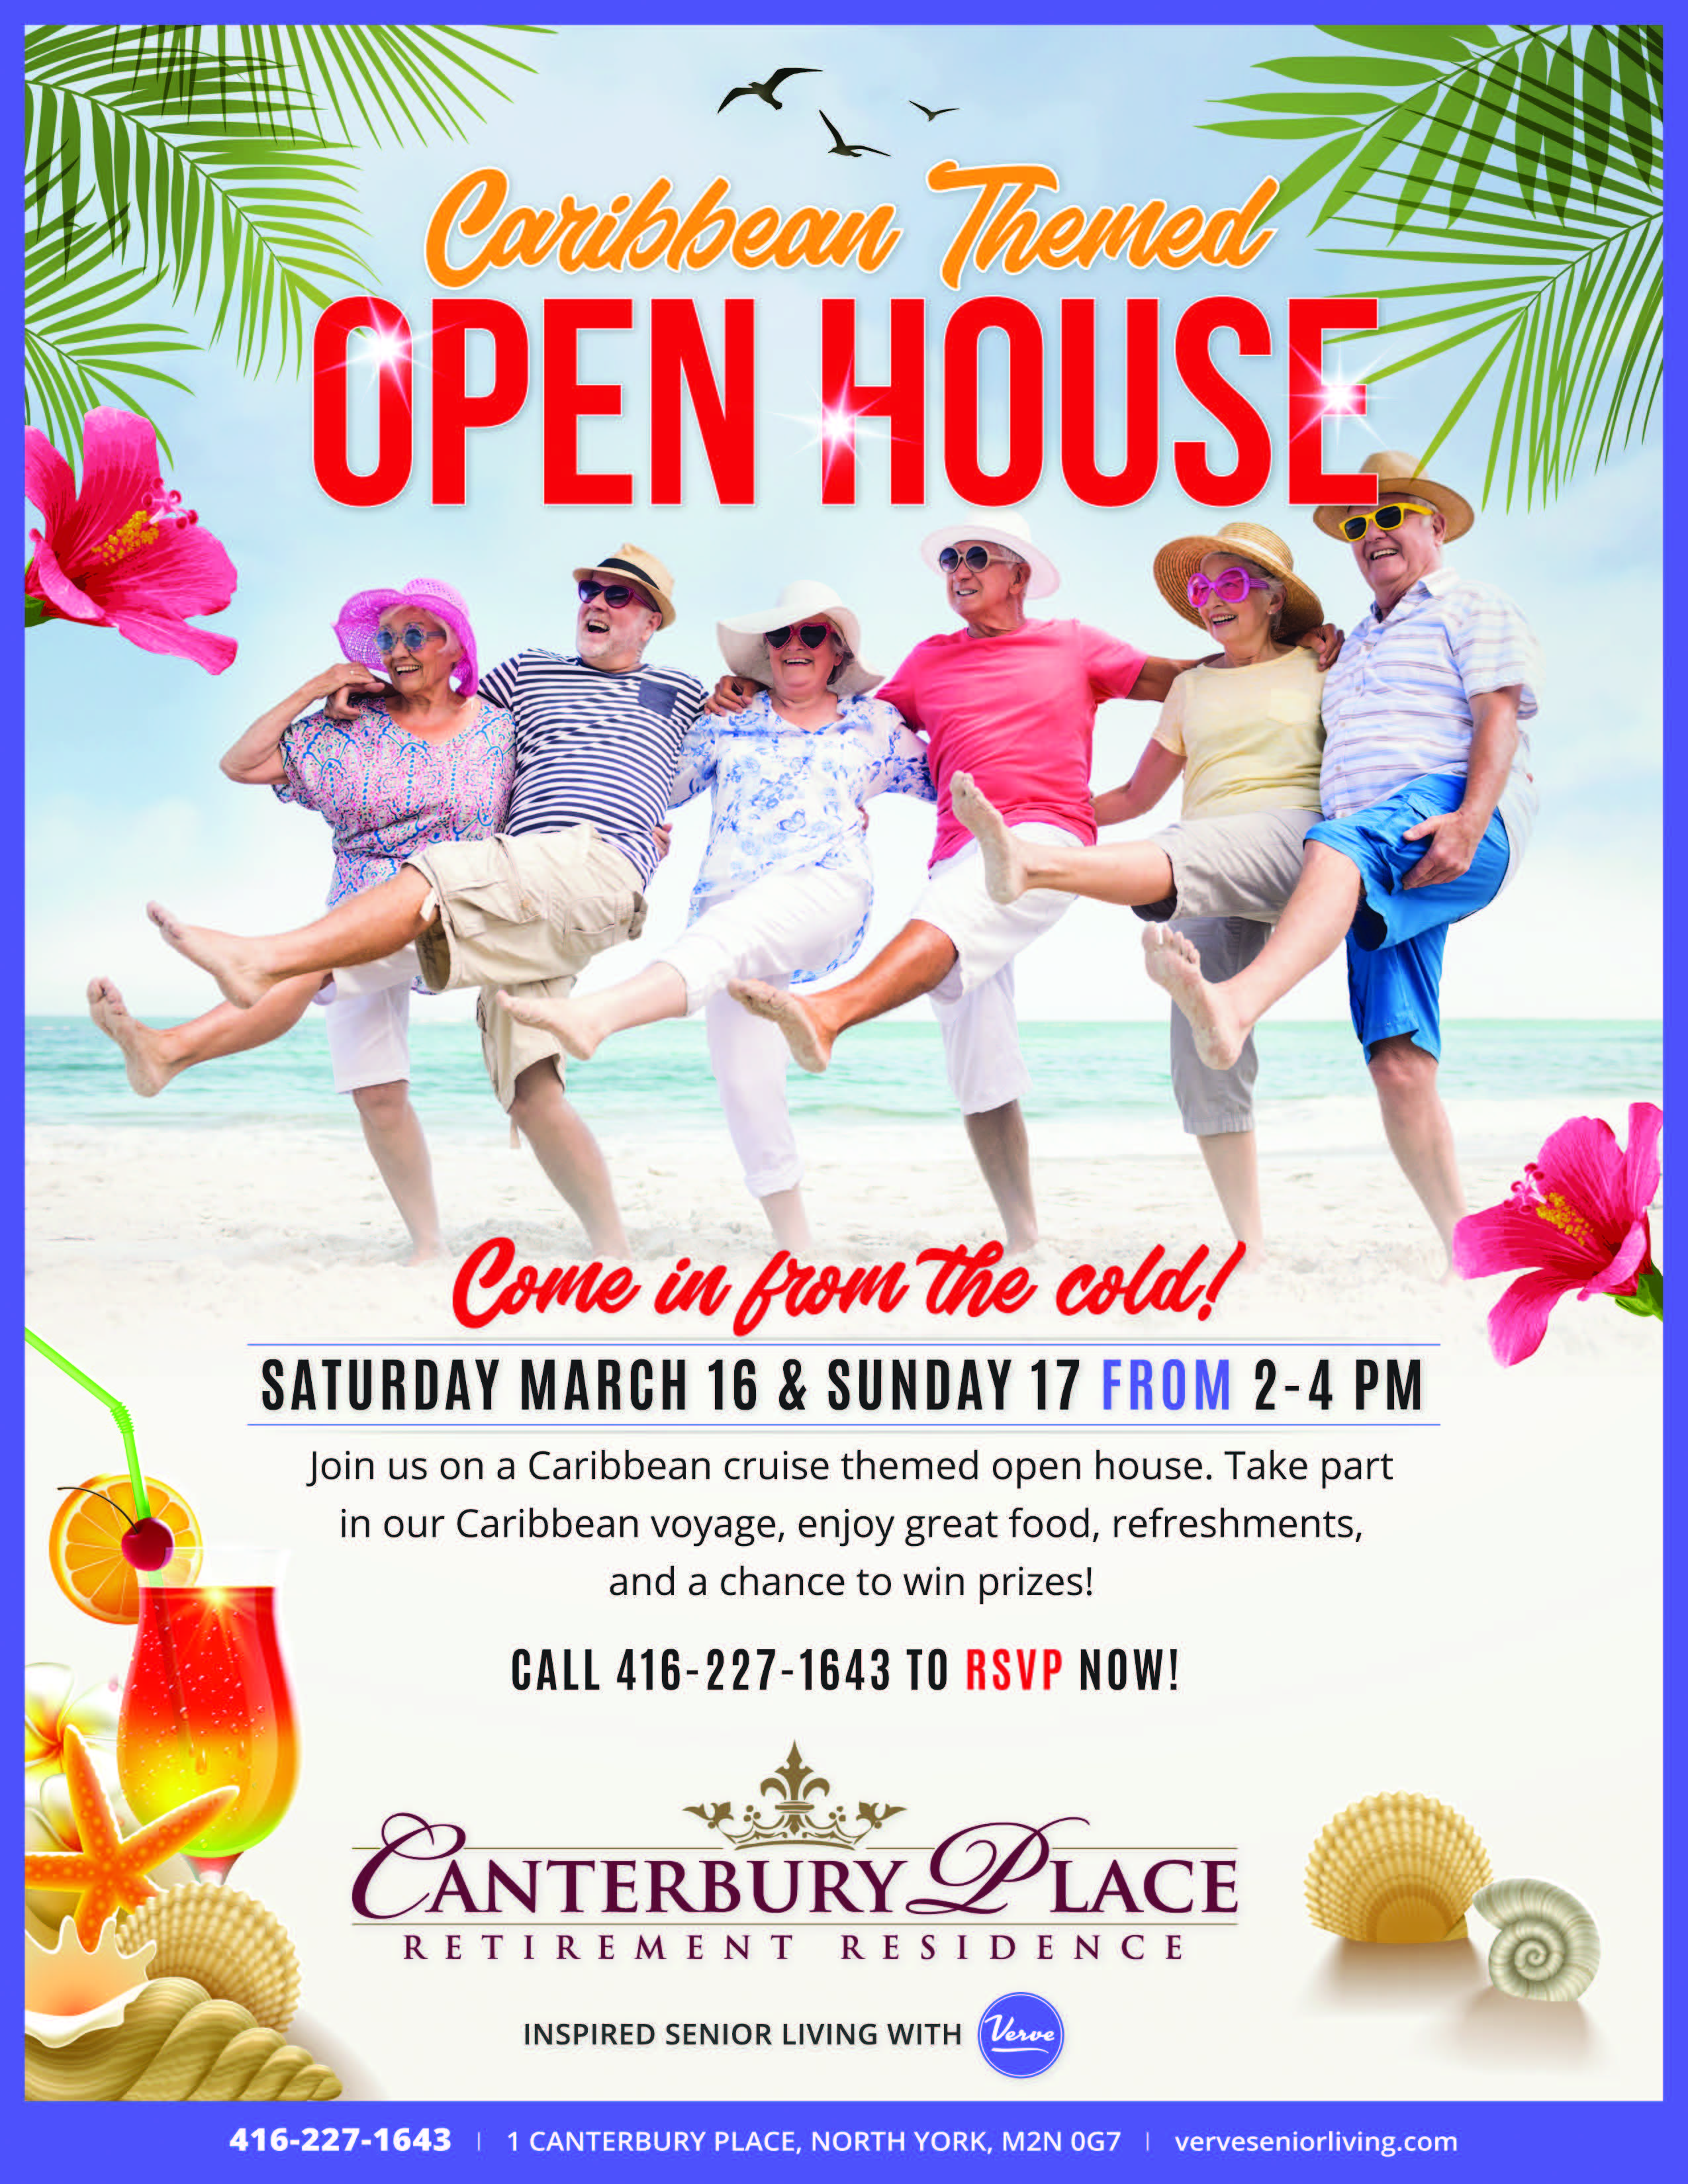 Canterbury Place Caribbean Themed Open House